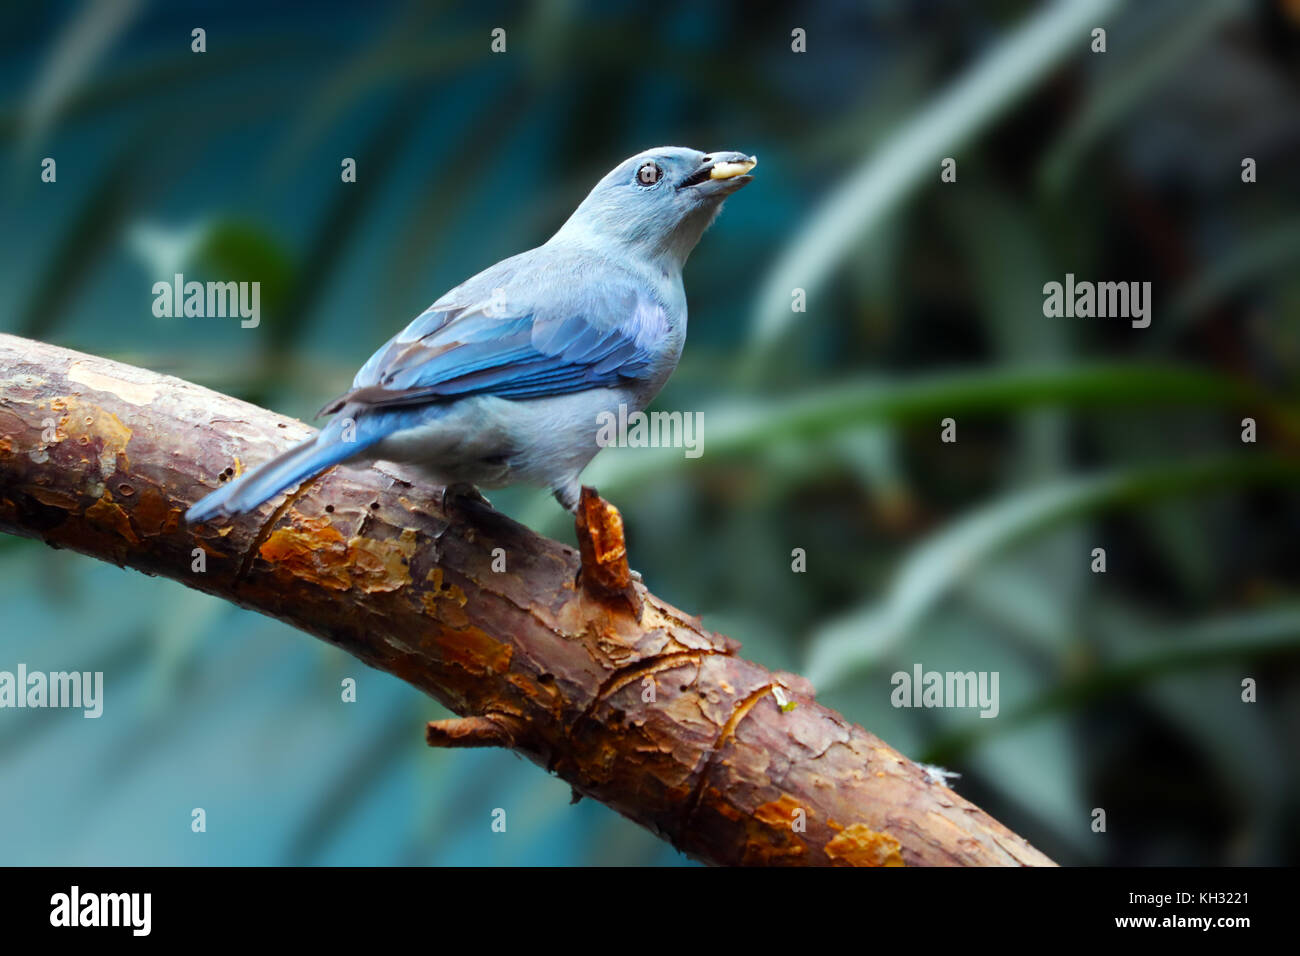 blue-gray tanager bird holding a piece of a fruit in its beak sitting on a branch Stock Photo